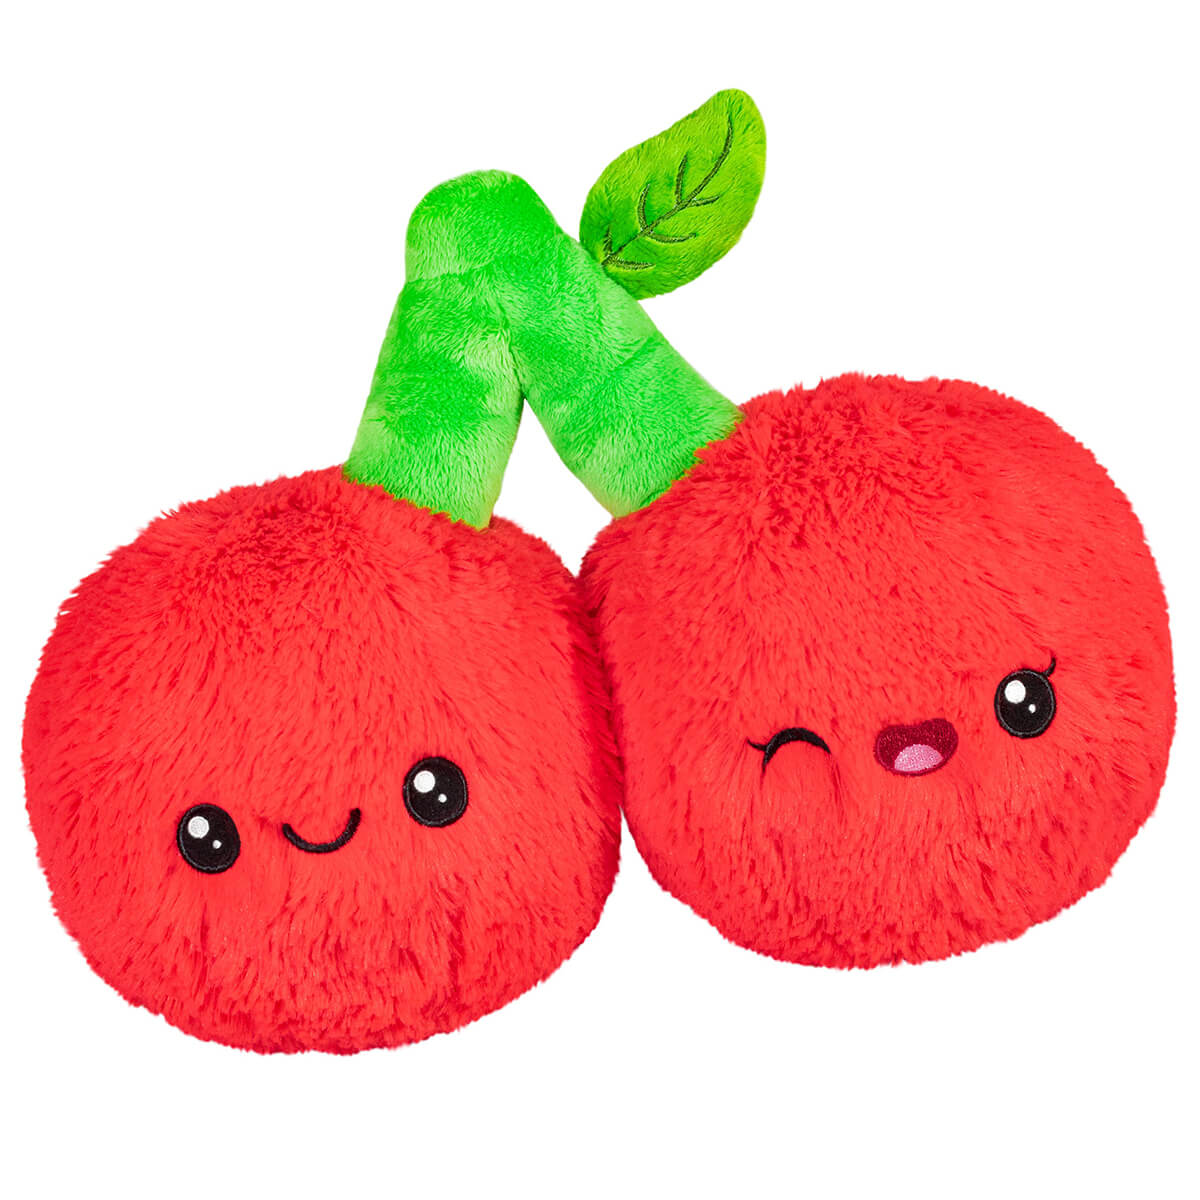 Snugglemi Snackers from Squishable - 2 Red Cherries linked together by a gfreen stem.